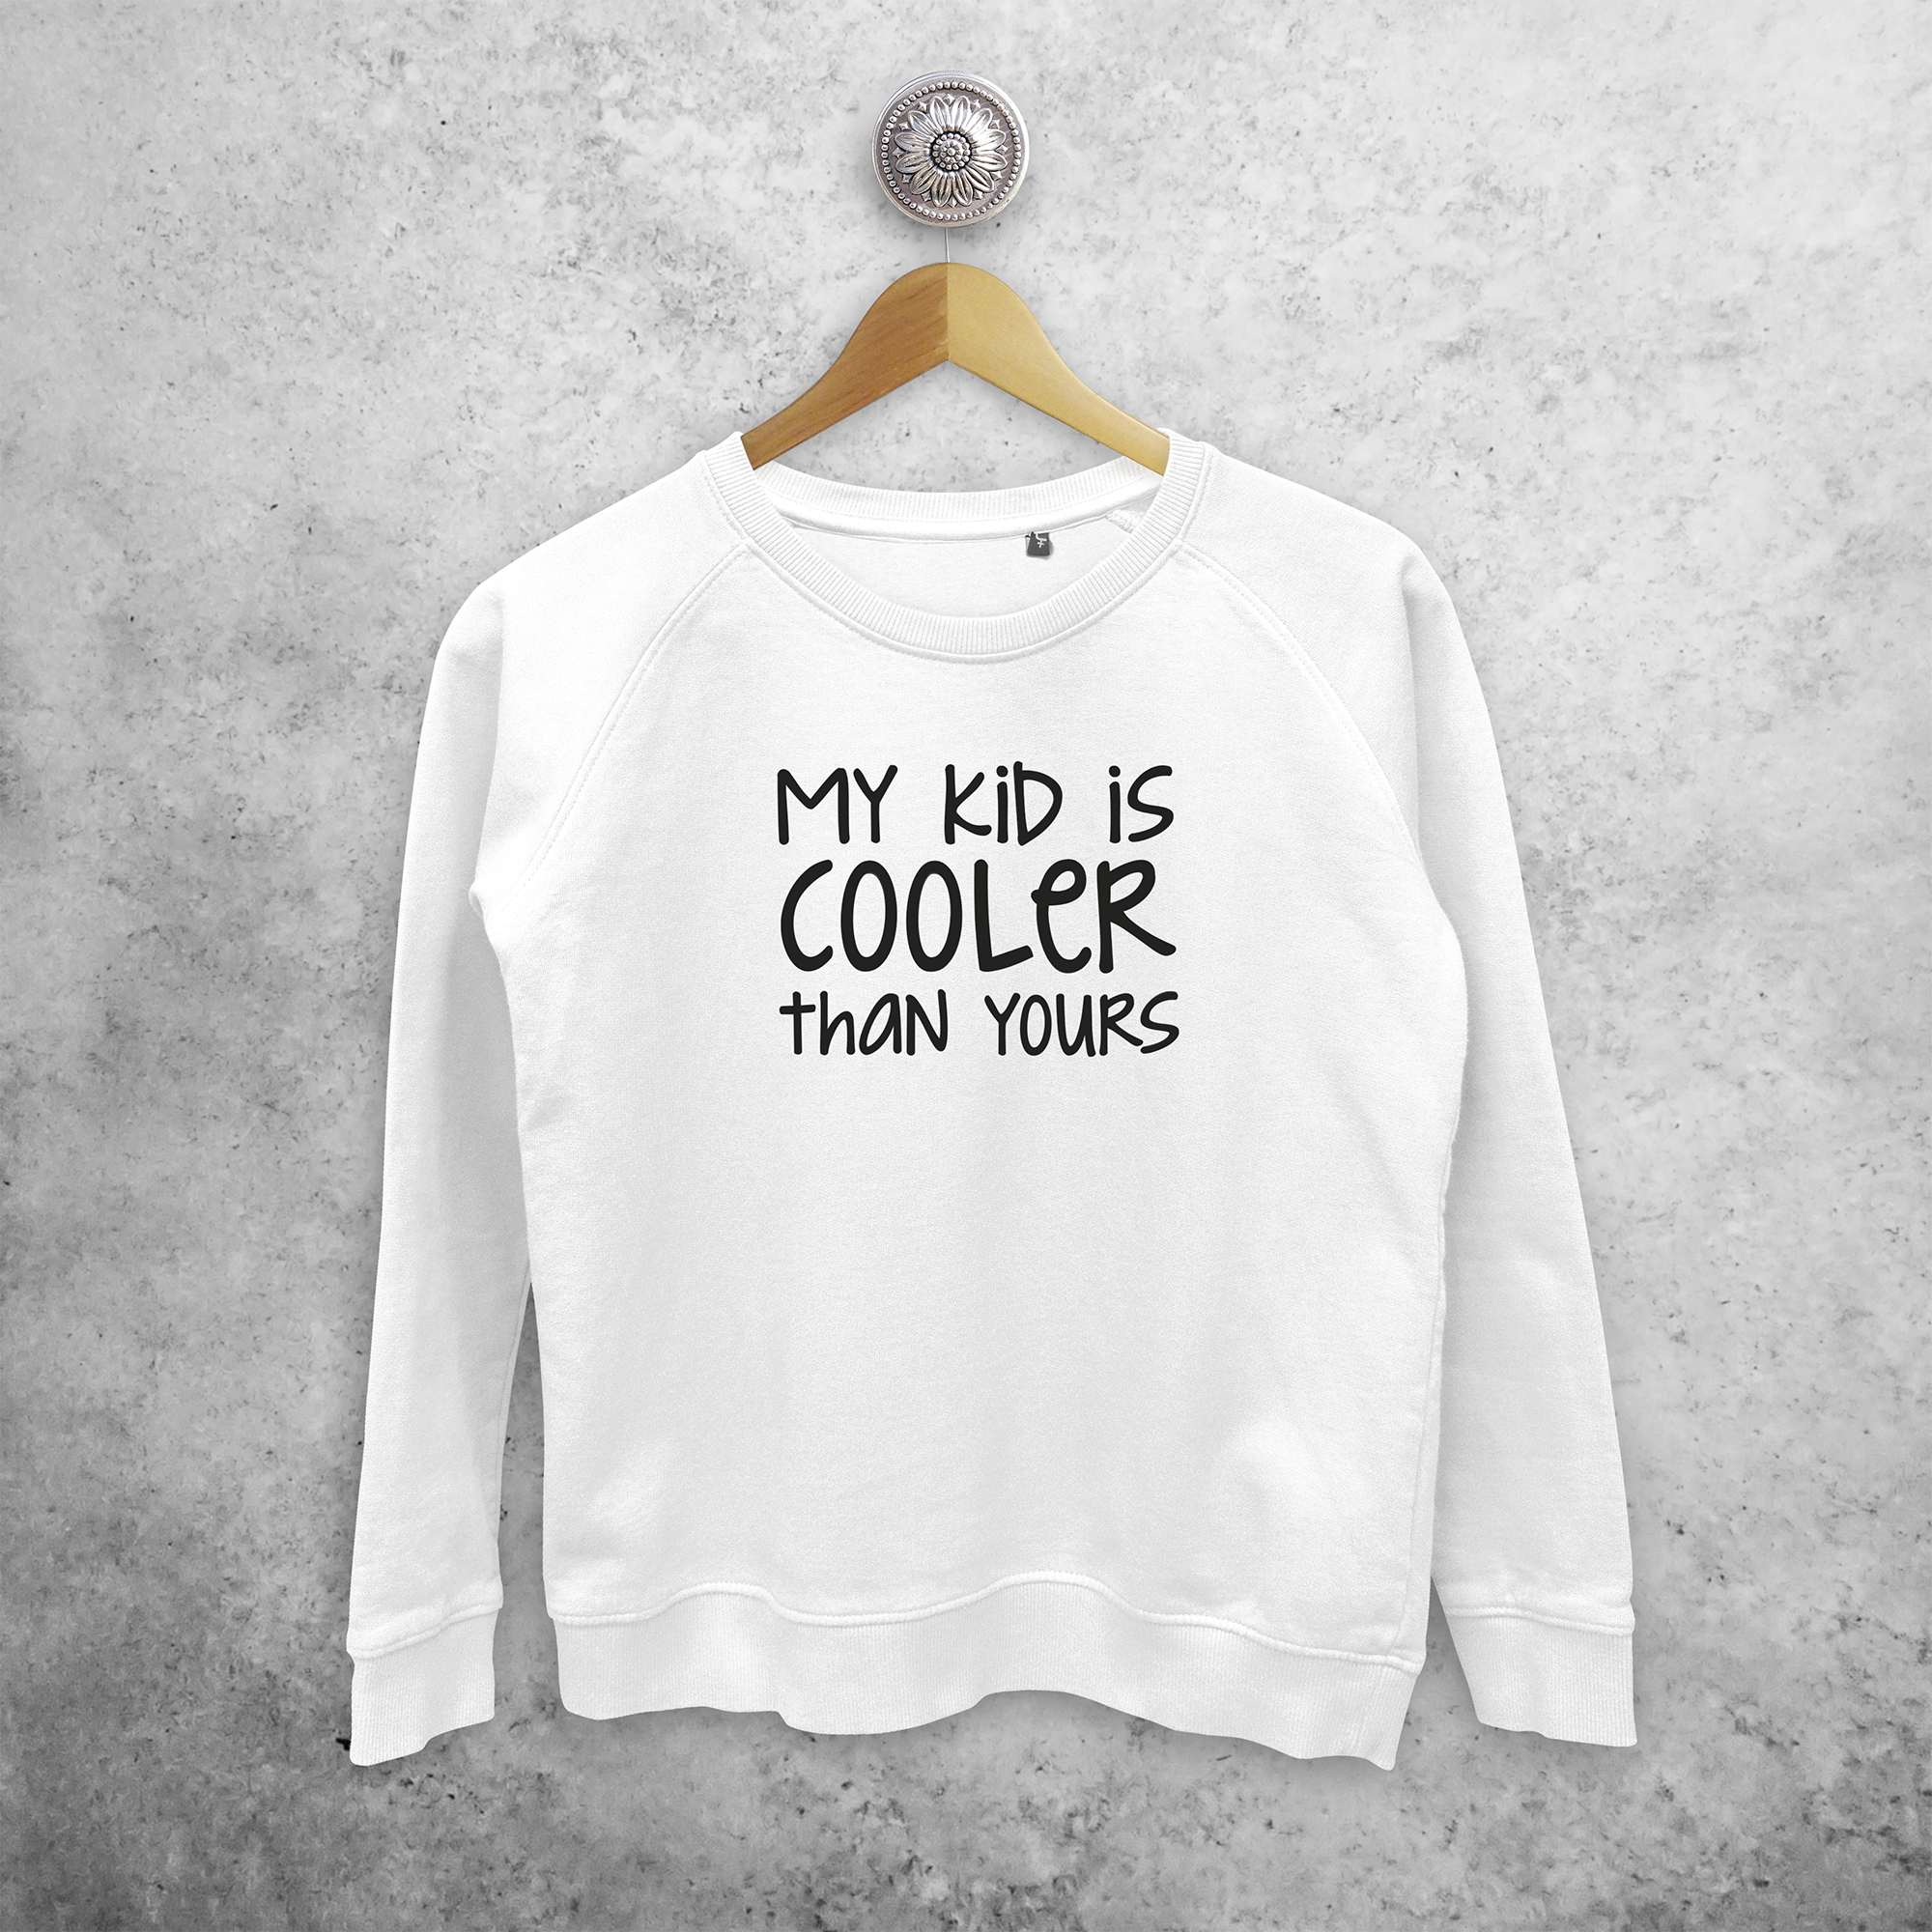 'My kid is cooler than yours' sweater